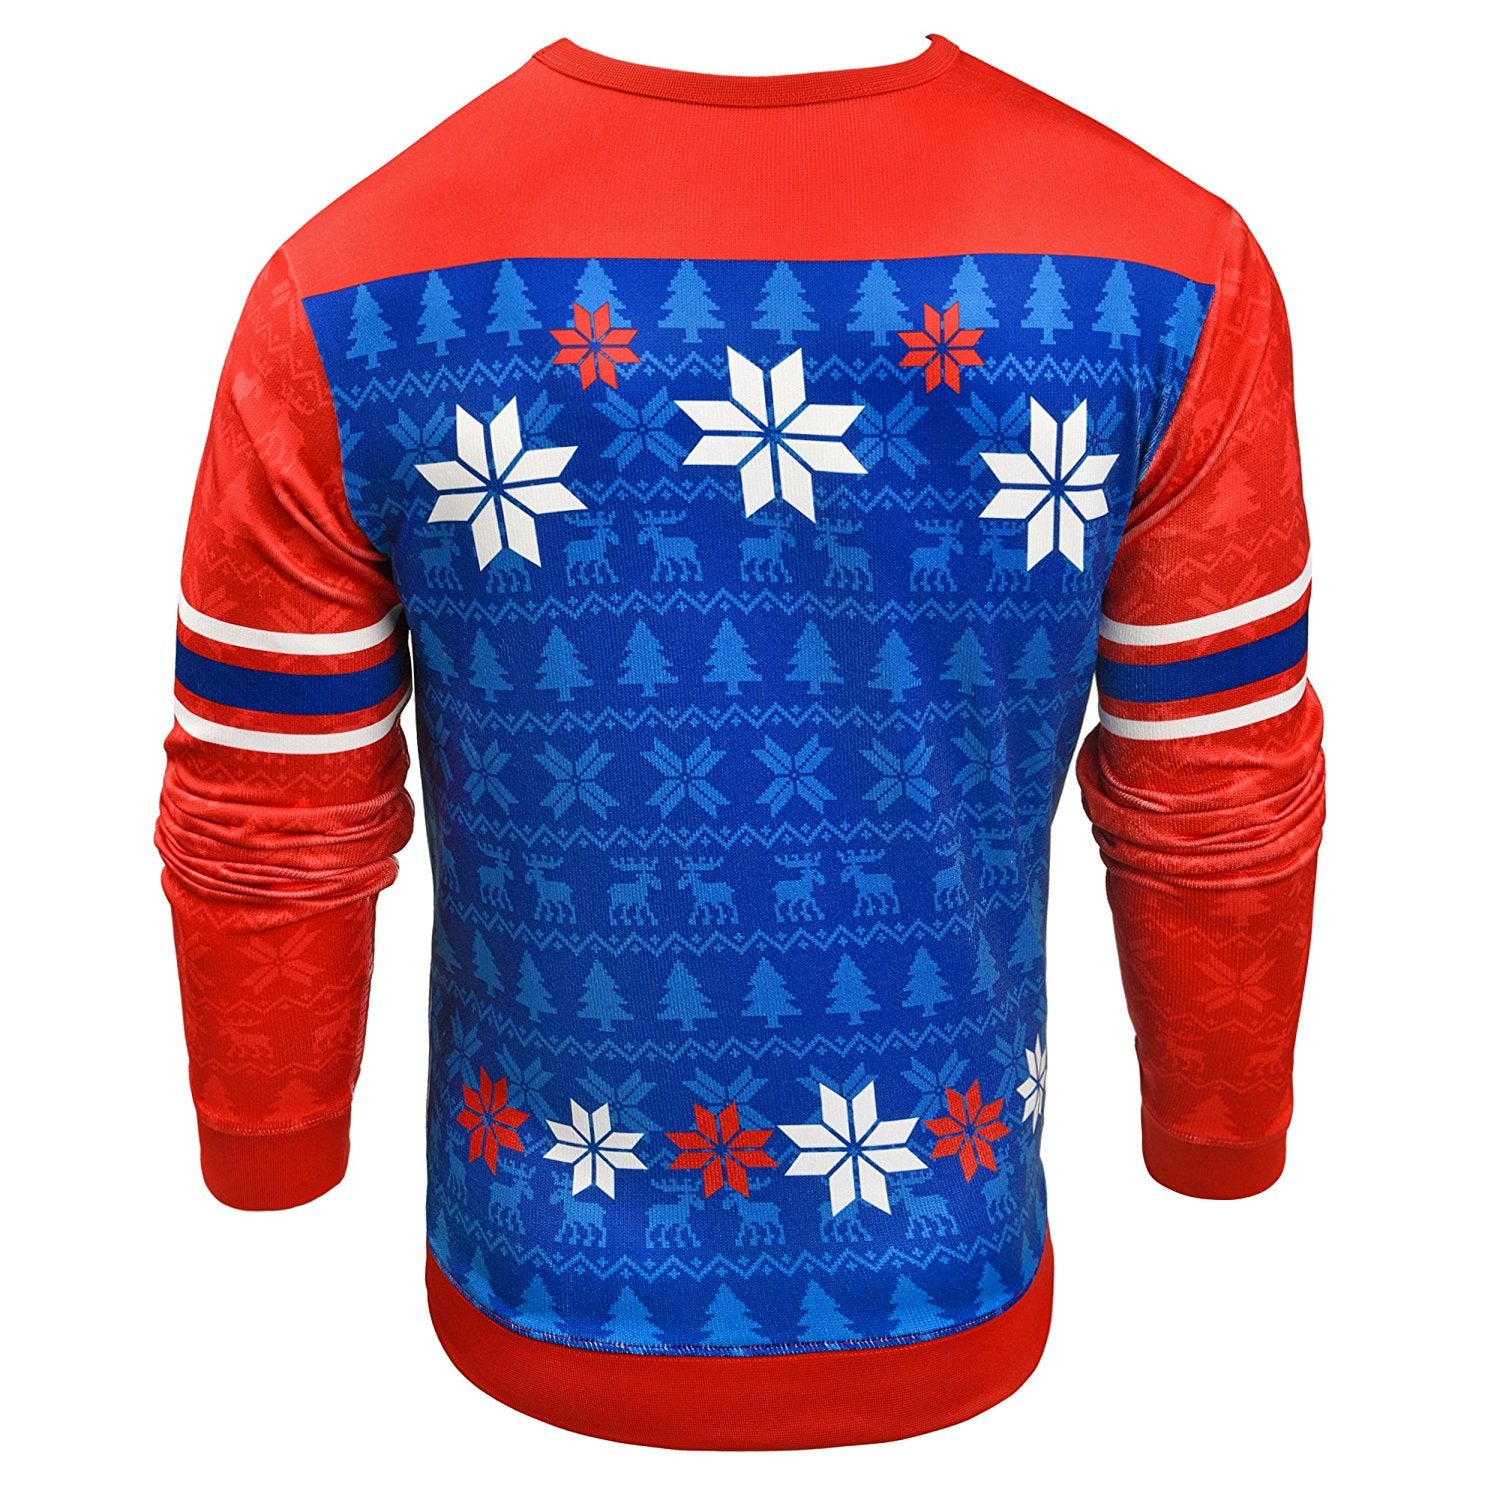 NHL New York Rangers Ugly Christmas Sweater Small S Red Blue